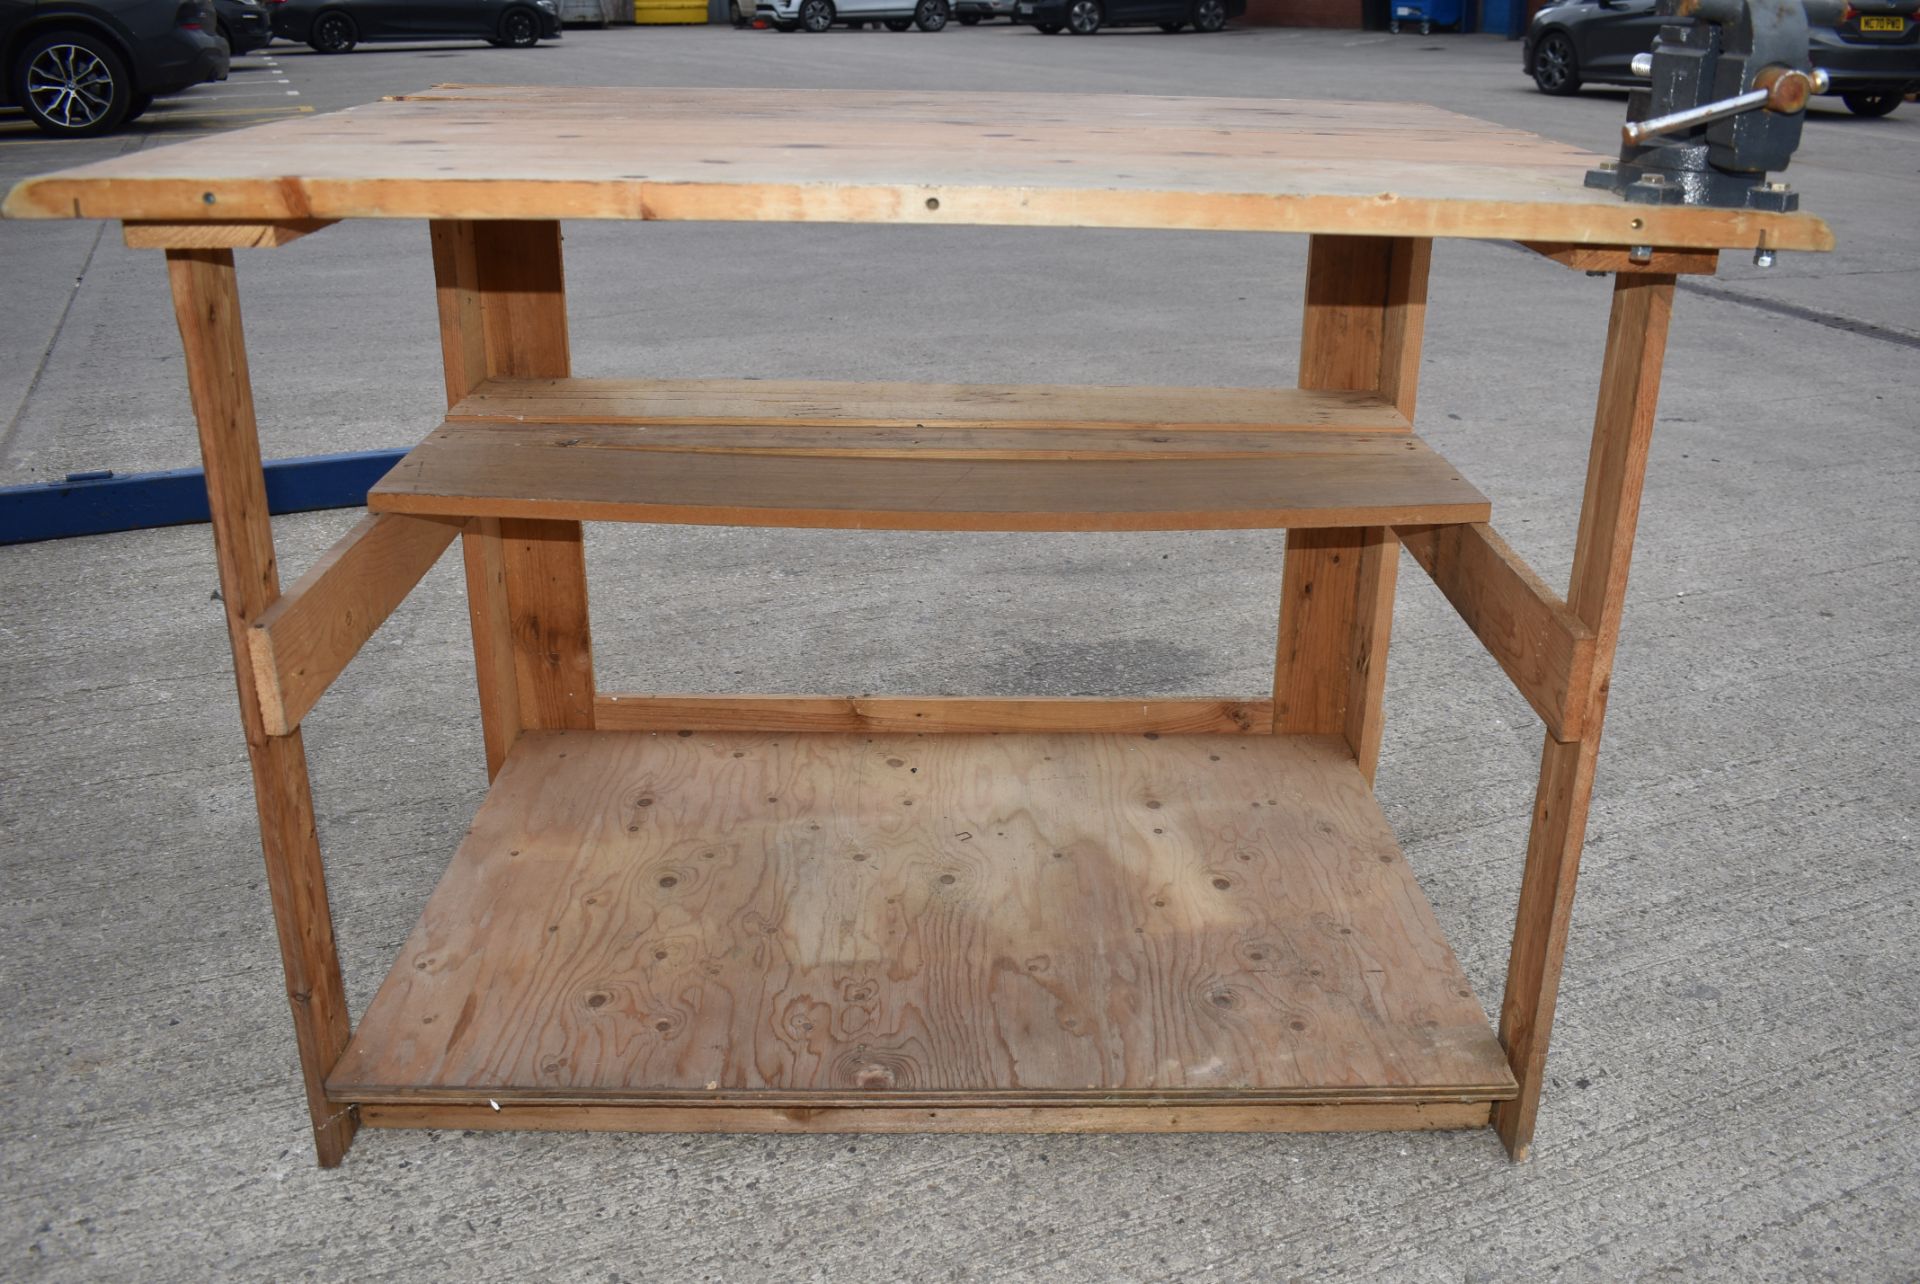 1 x Wooden Workbench With Stanley 4" Vice - 118 (L) x 94.5(D) x 88(H) cms - Ref: K234 - CL905 - Loca - Image 2 of 10